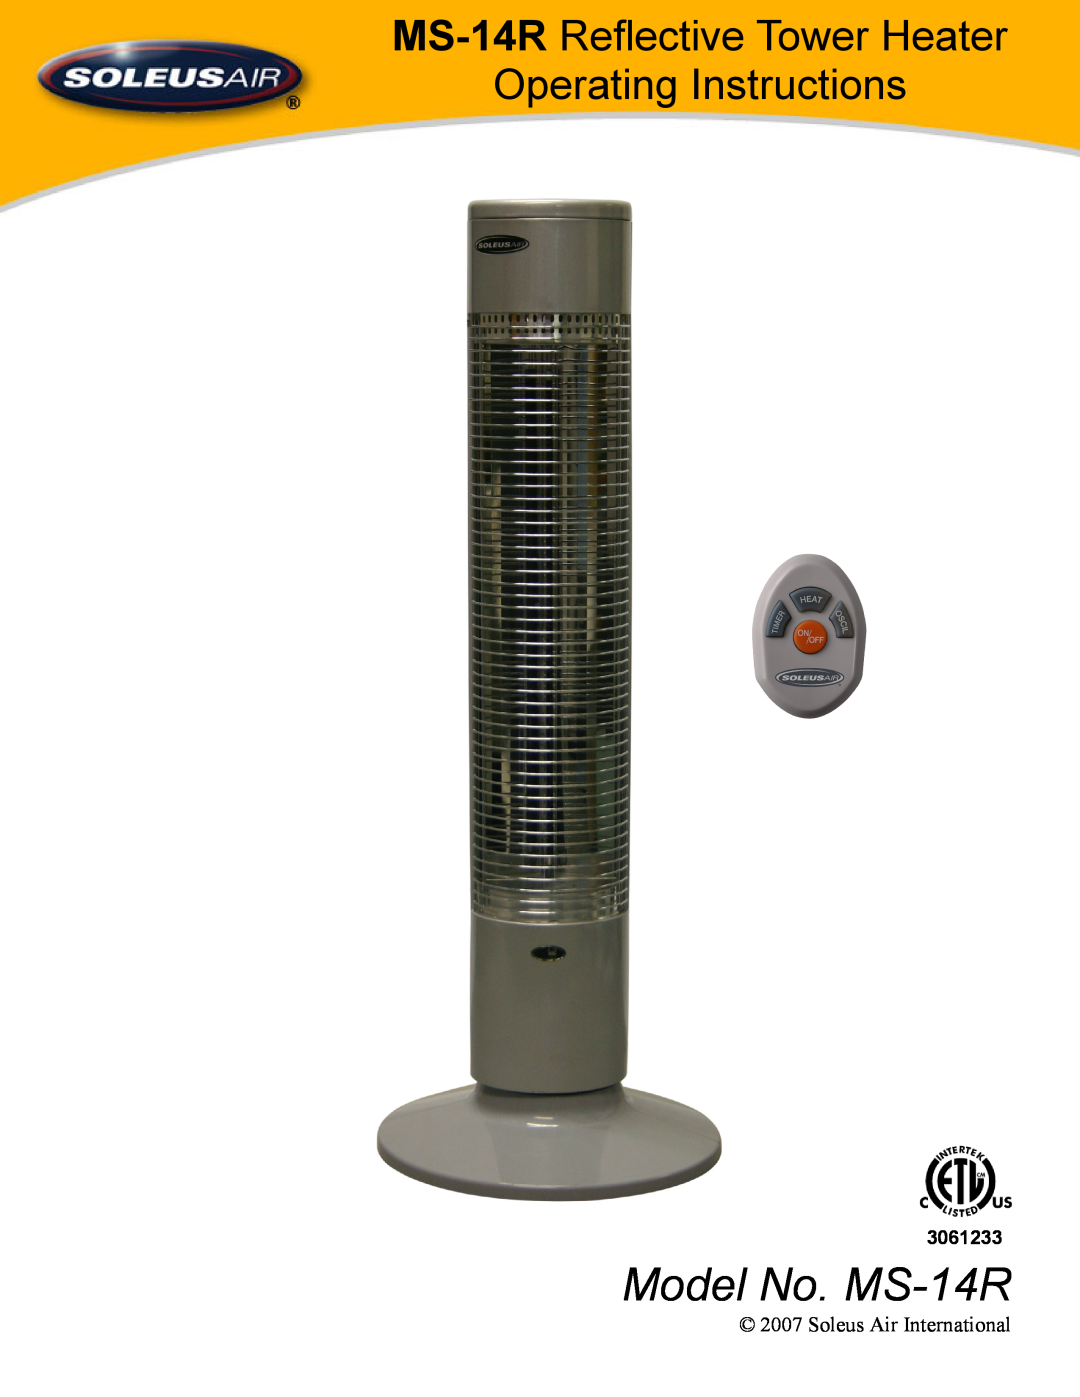 Soleus Air manual Model No. MS-14R, MS-14RReflective Tower Heater, Operating Instructions 